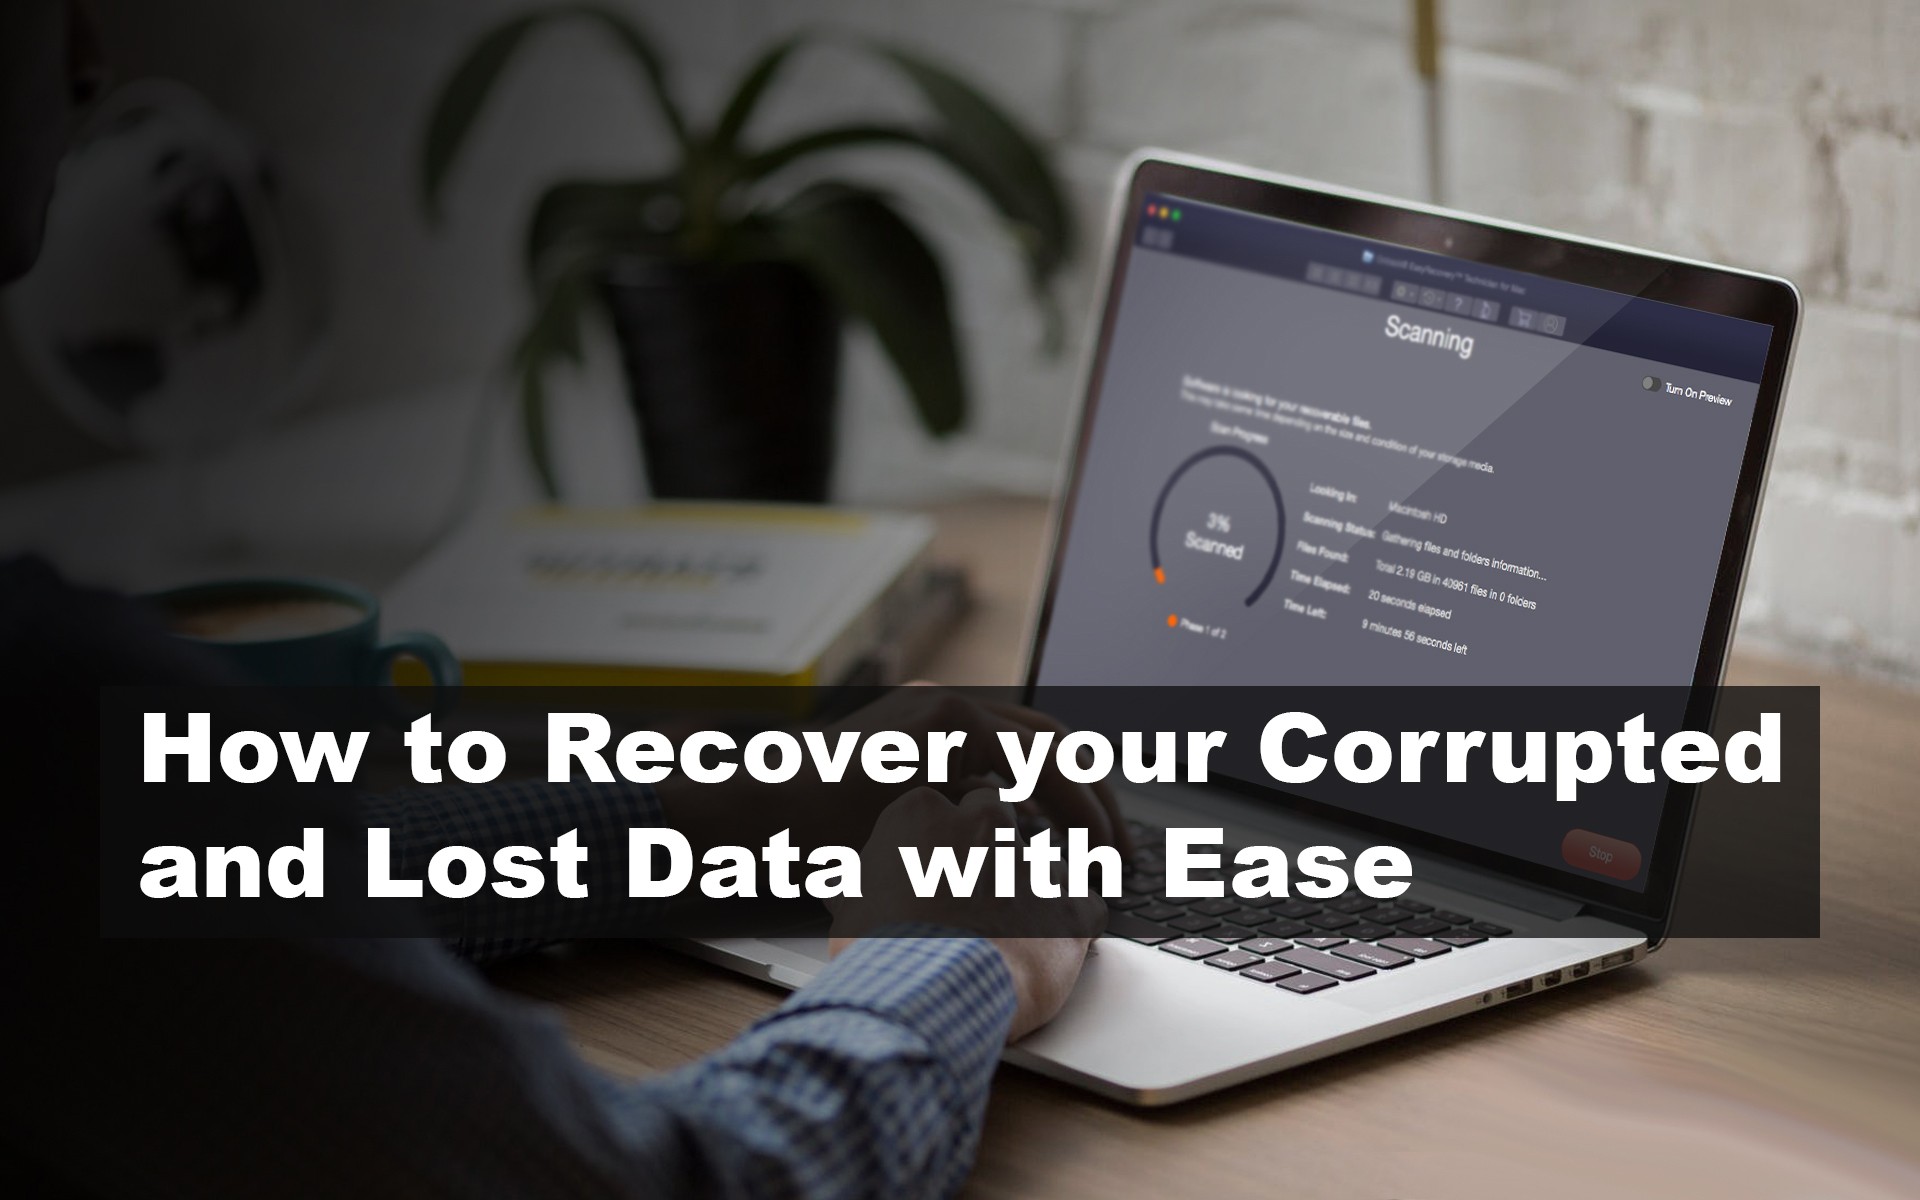 How to Recover your Corrupted and Lost Data with Ease